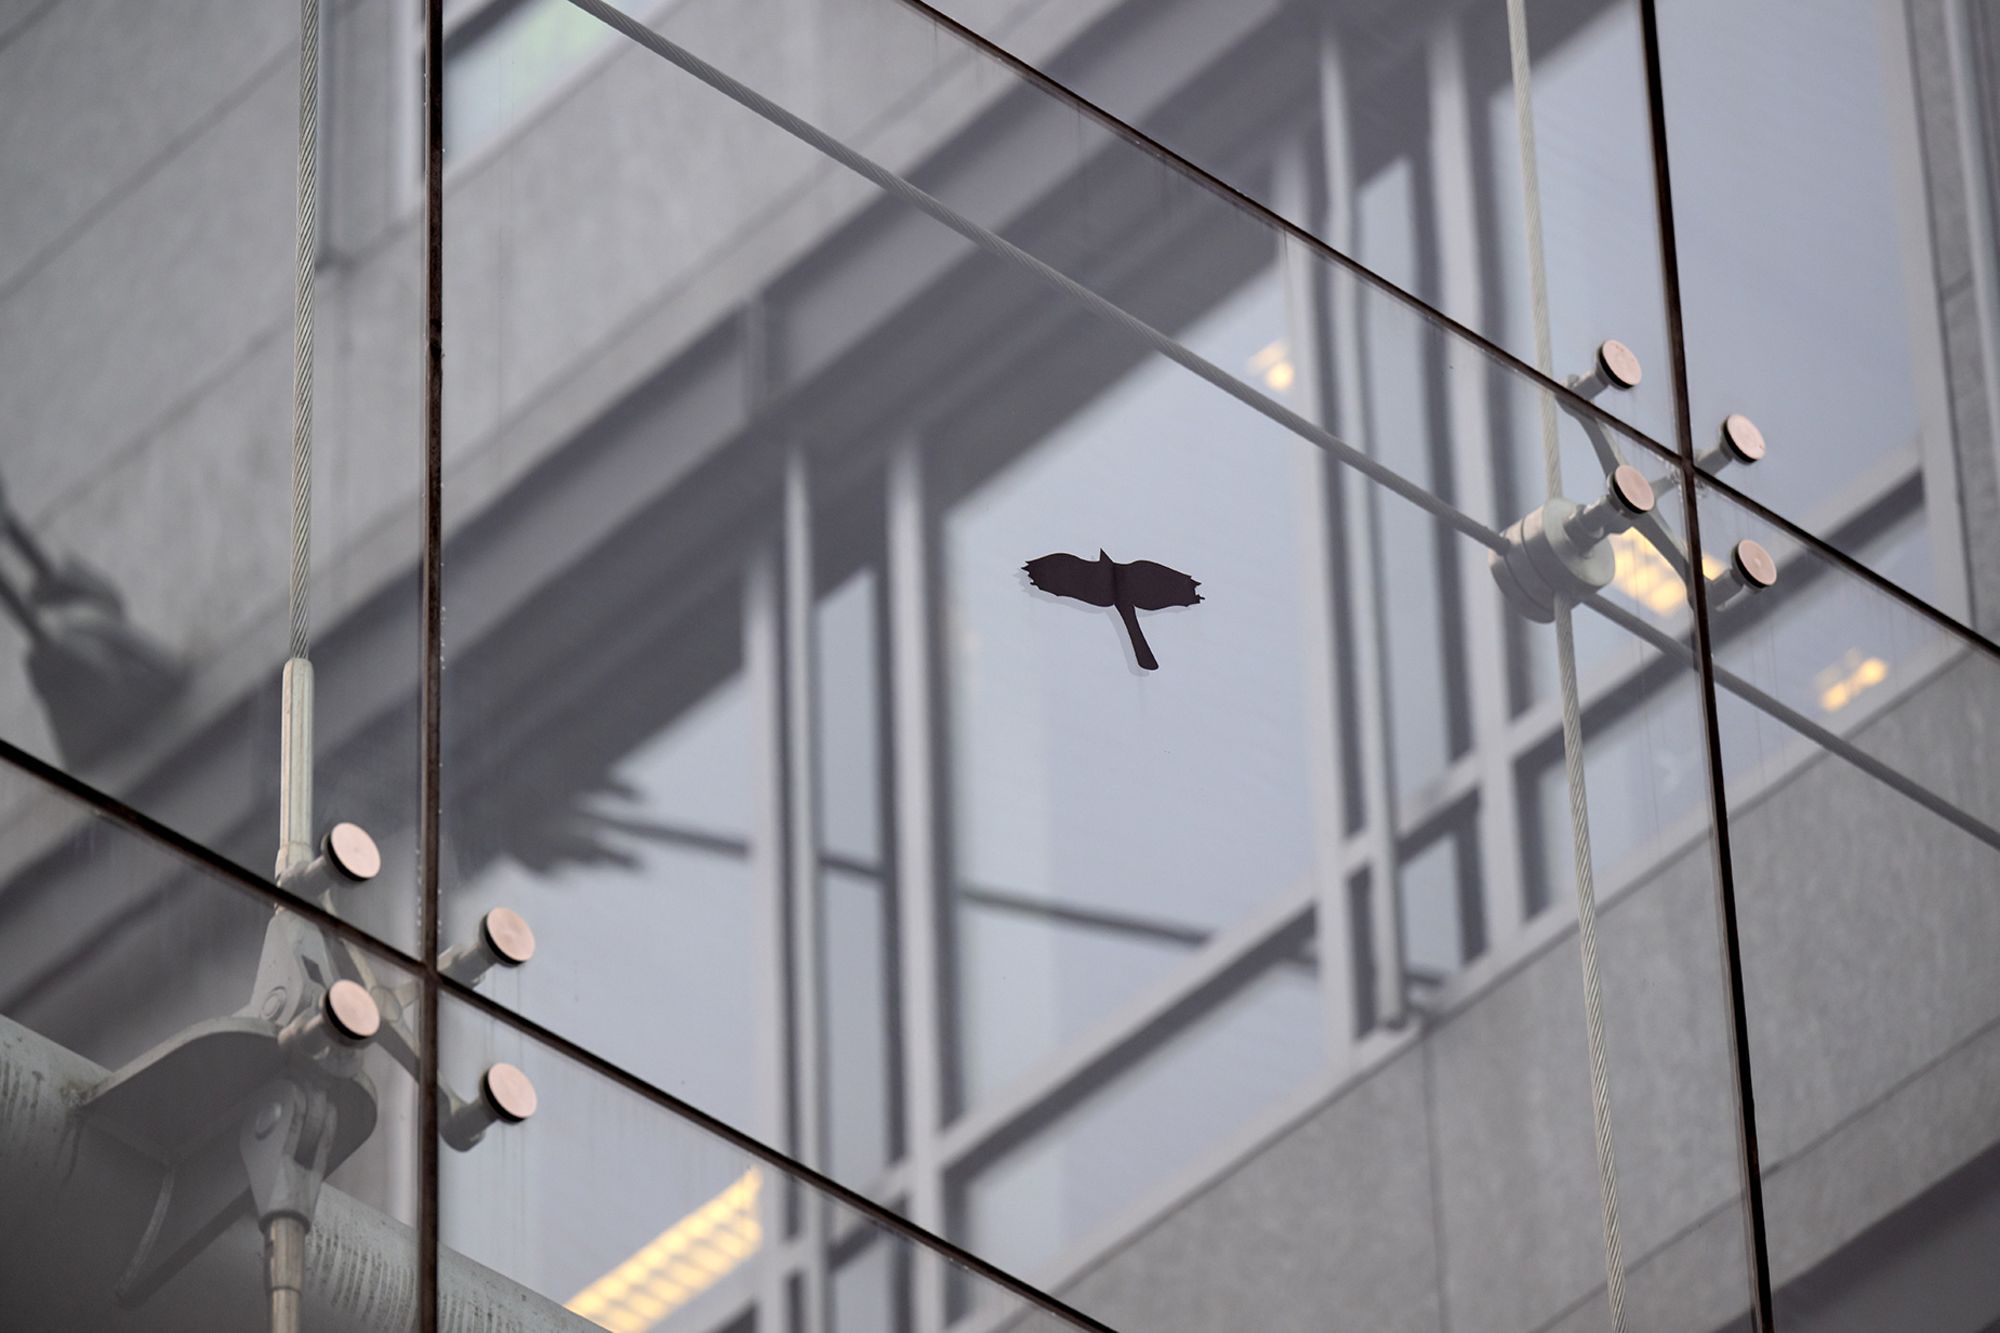 A sticker in the shape of a bird of prey is seen on a window pane from an office building in Munich, Germany. Window stickers are designed to prevent bird collisions.